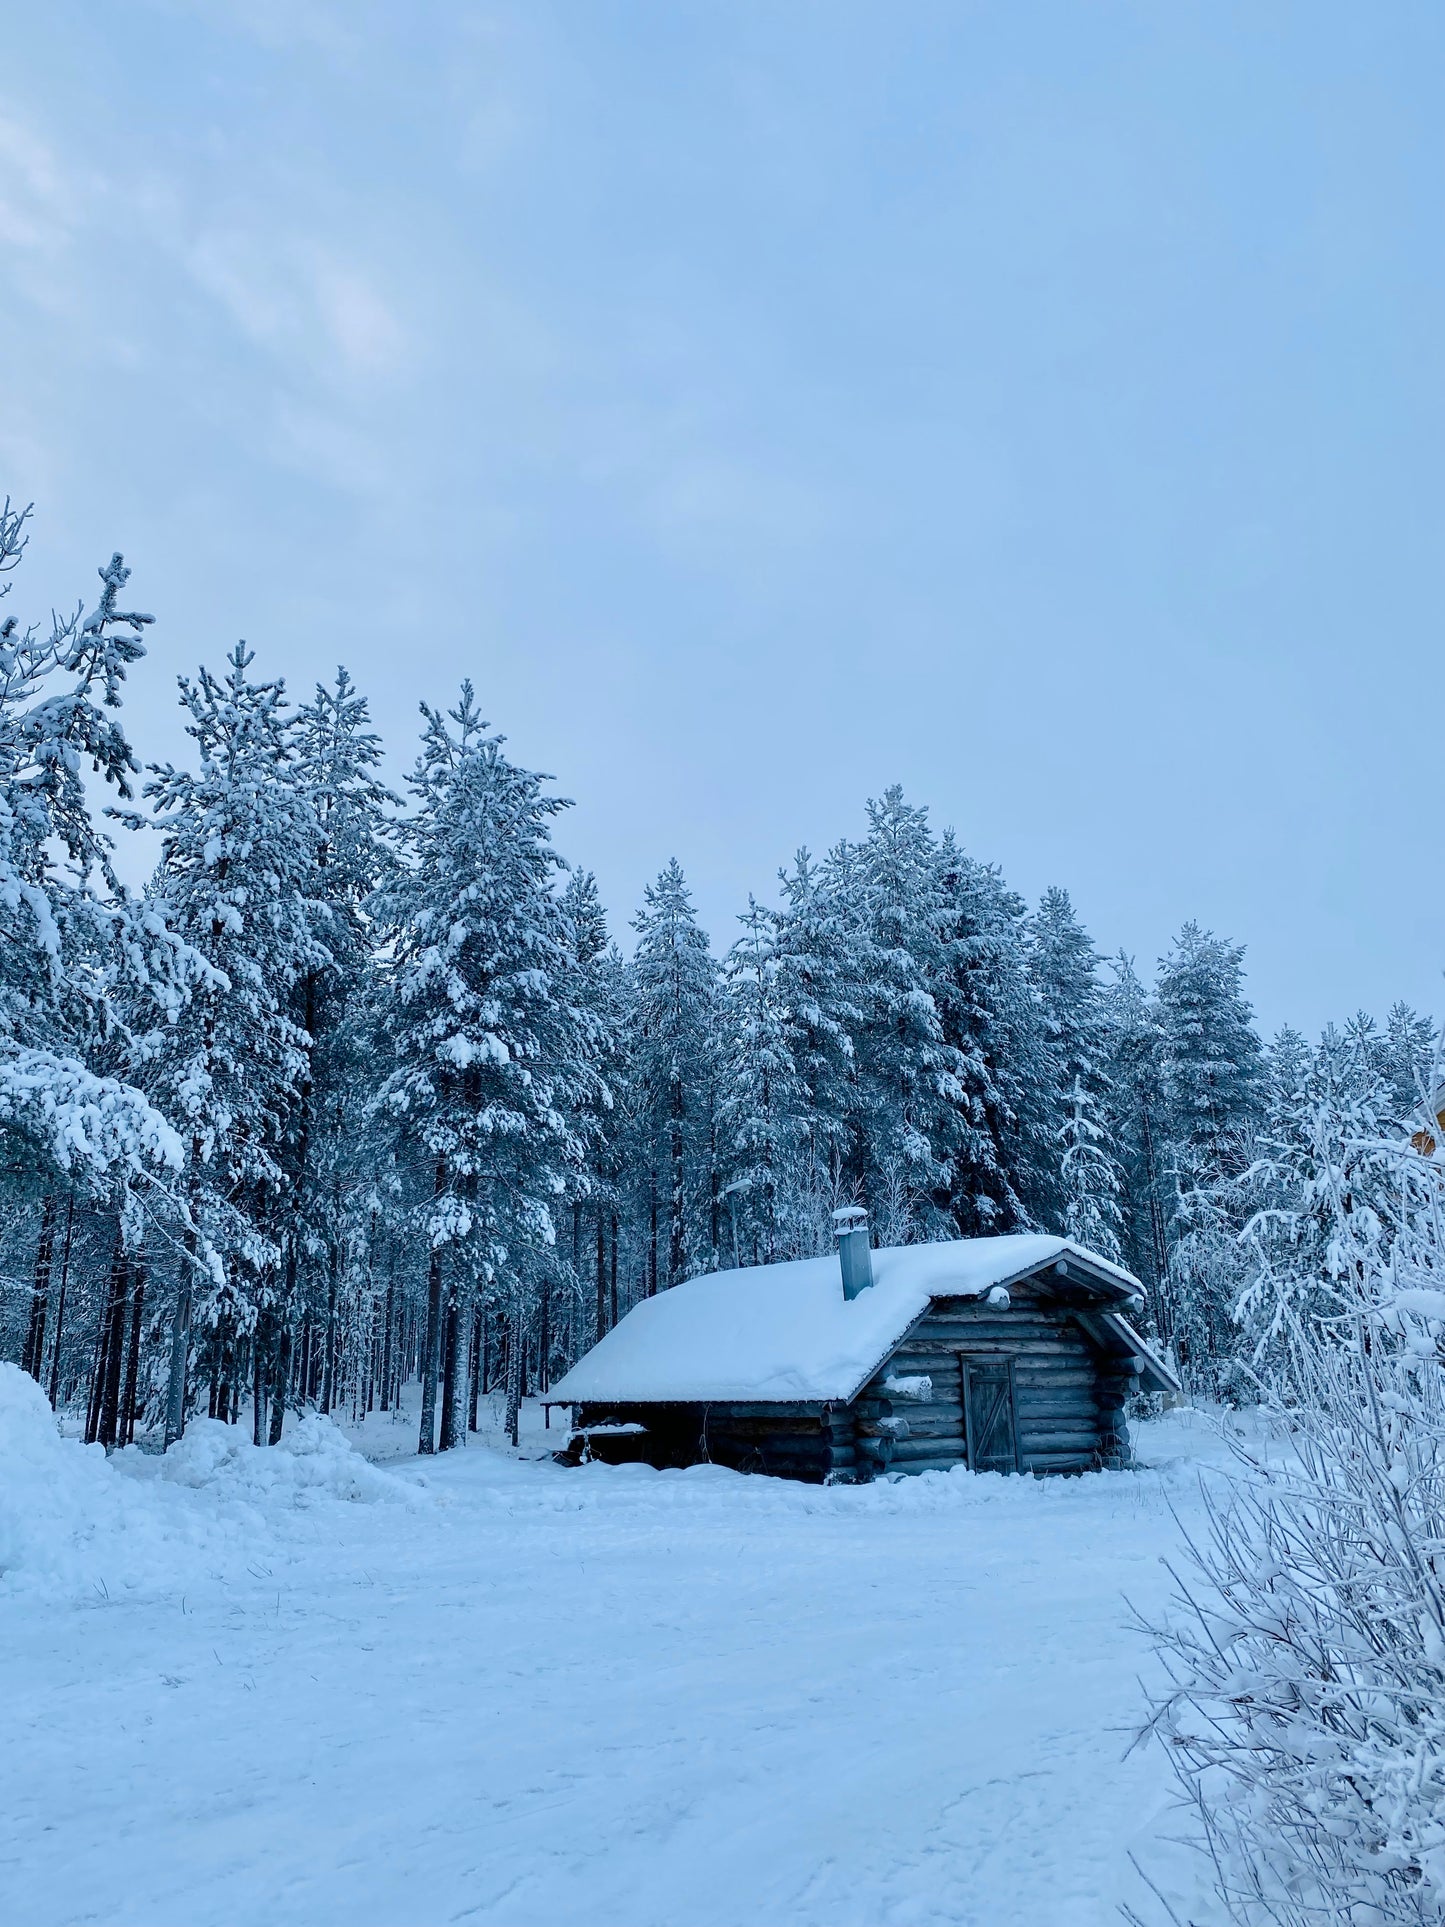 FINLAND/ 7 DAYS IN ROVANIEMI- THE COMPLETE GUIDE WITH ACTIVITIES!